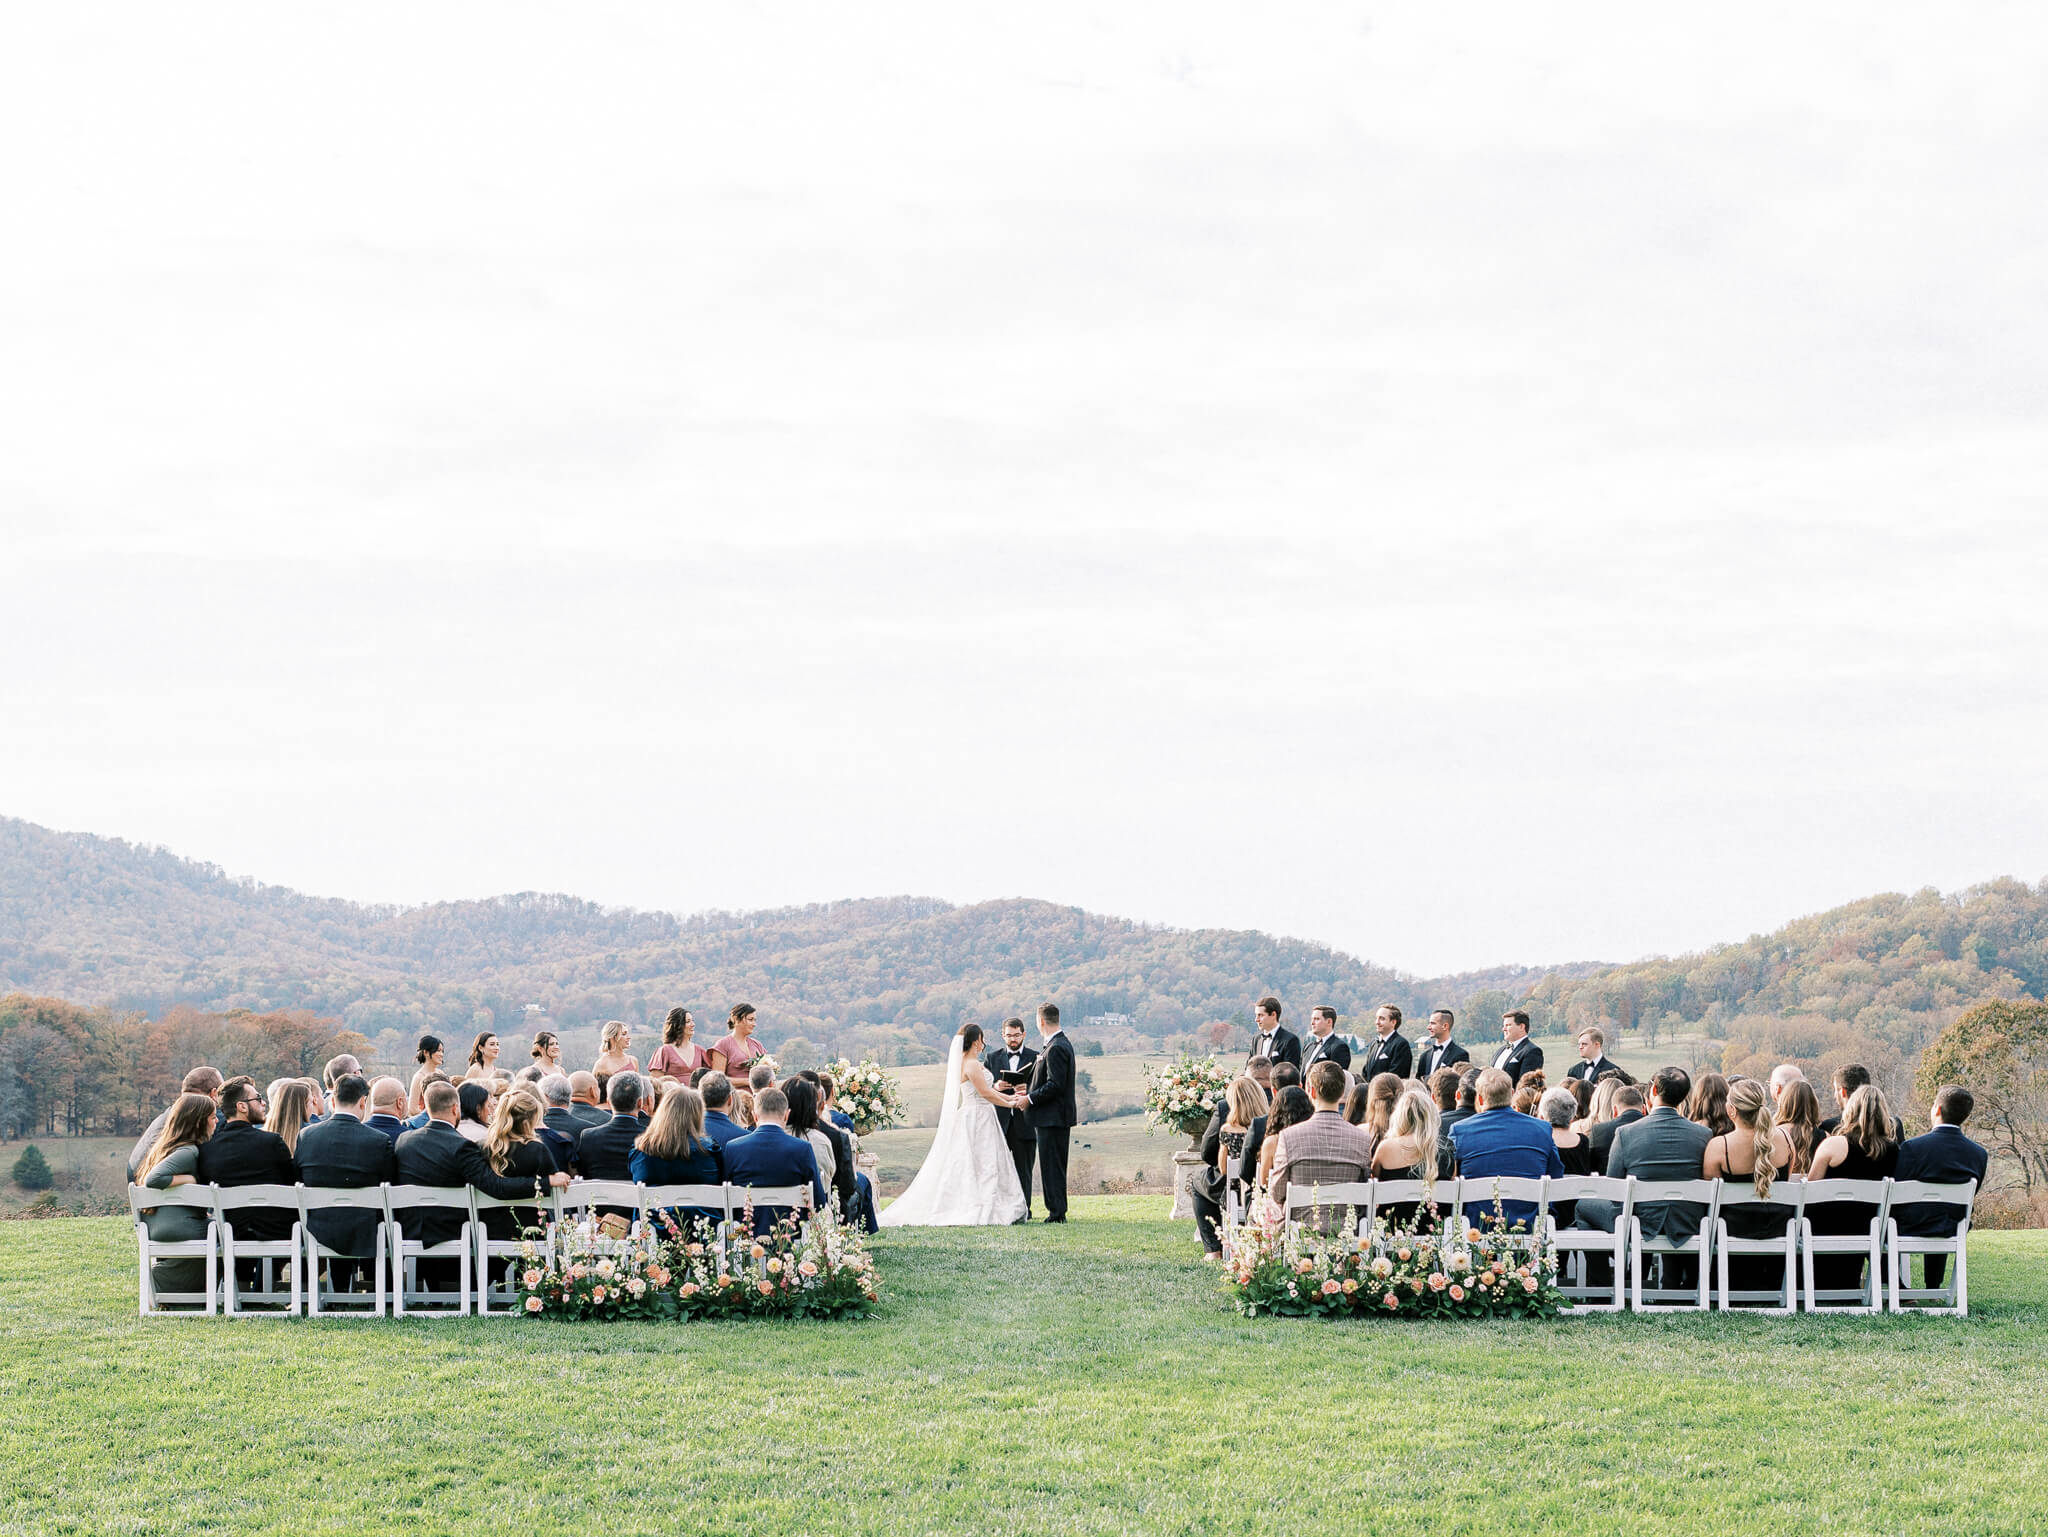 A full image of a wedding ceremony at Pippin Hill Vineyards in front of the Blue Ridge mountains.